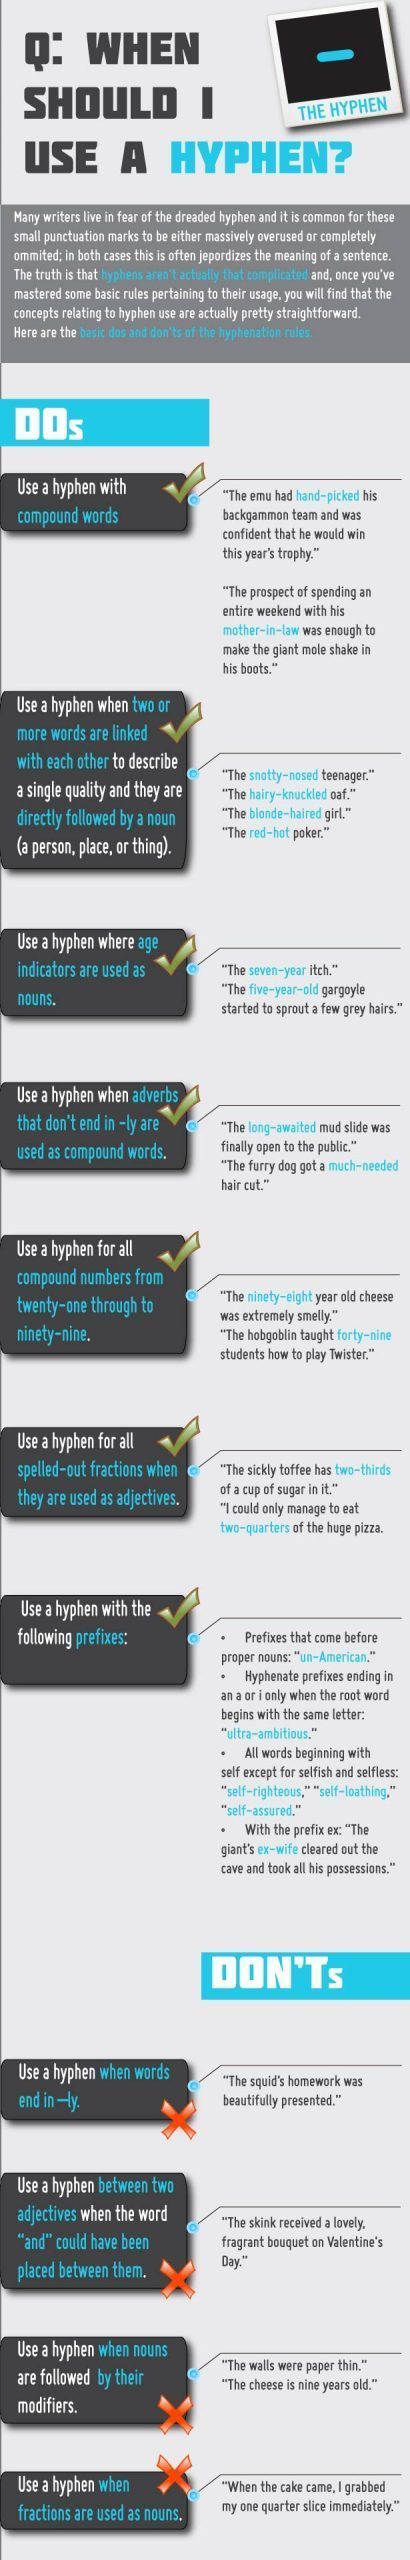 Hyphen use infographic